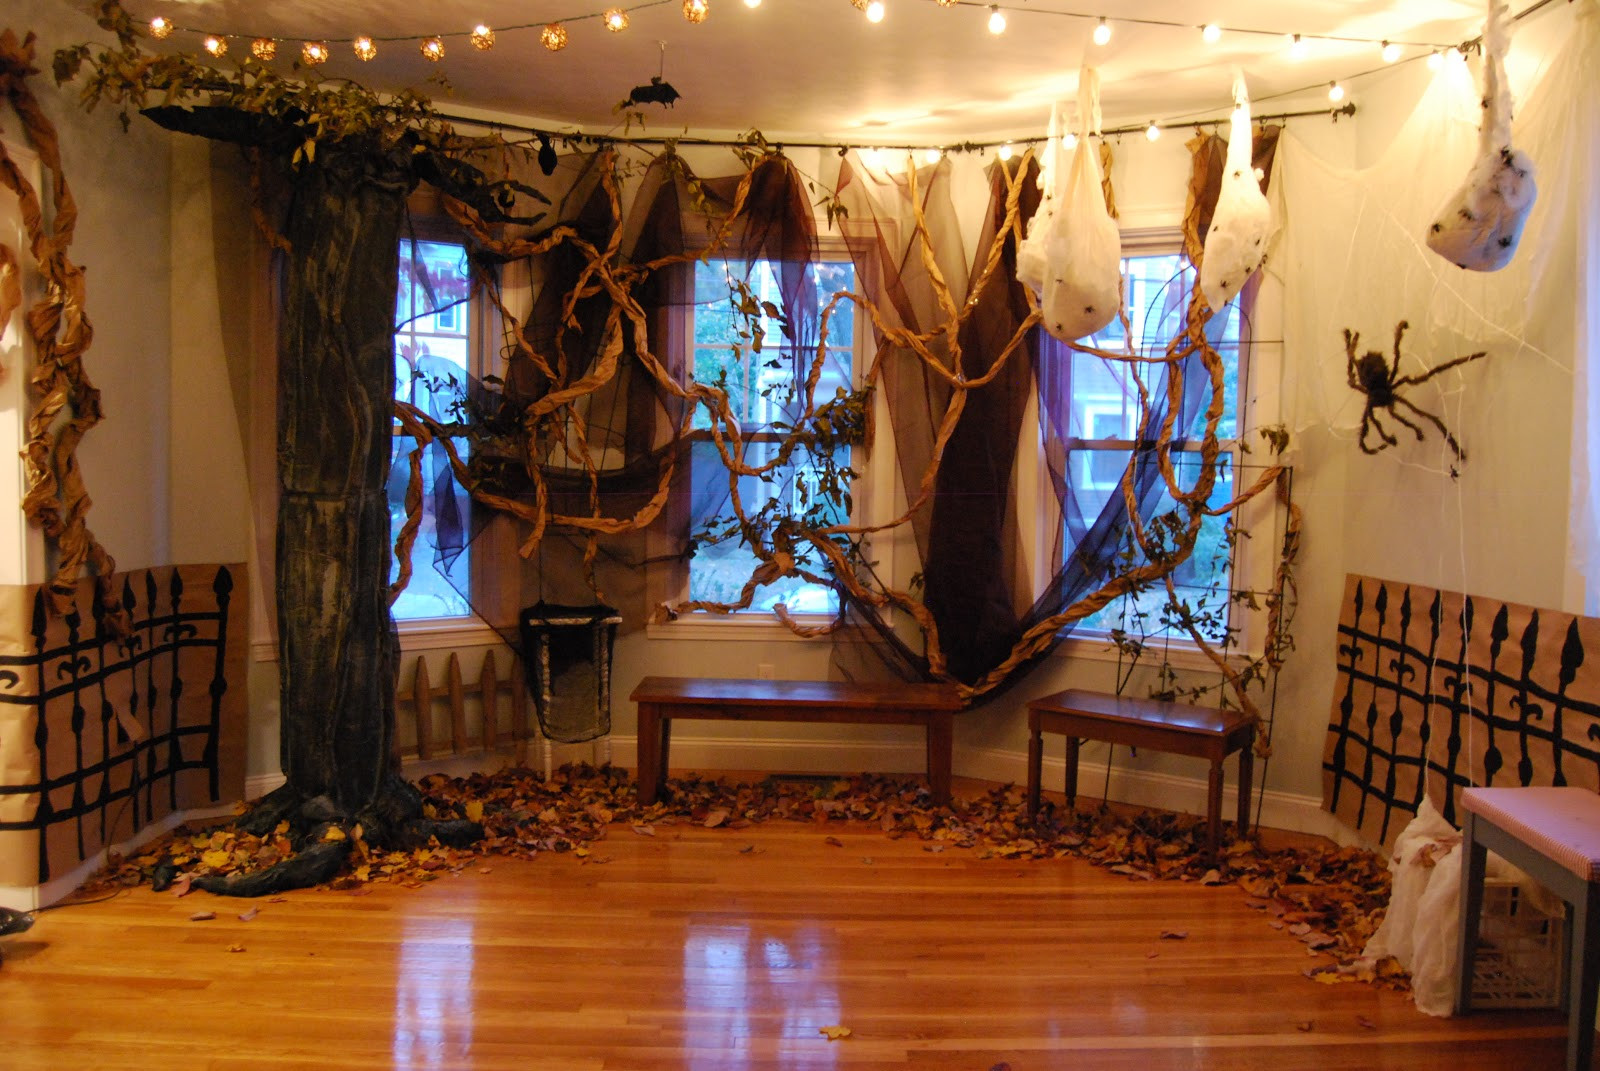 Indoor Halloween Party Decoration Ideas
 Scary Indoor Outdoor Halloween Decorations Ideas 2016 best